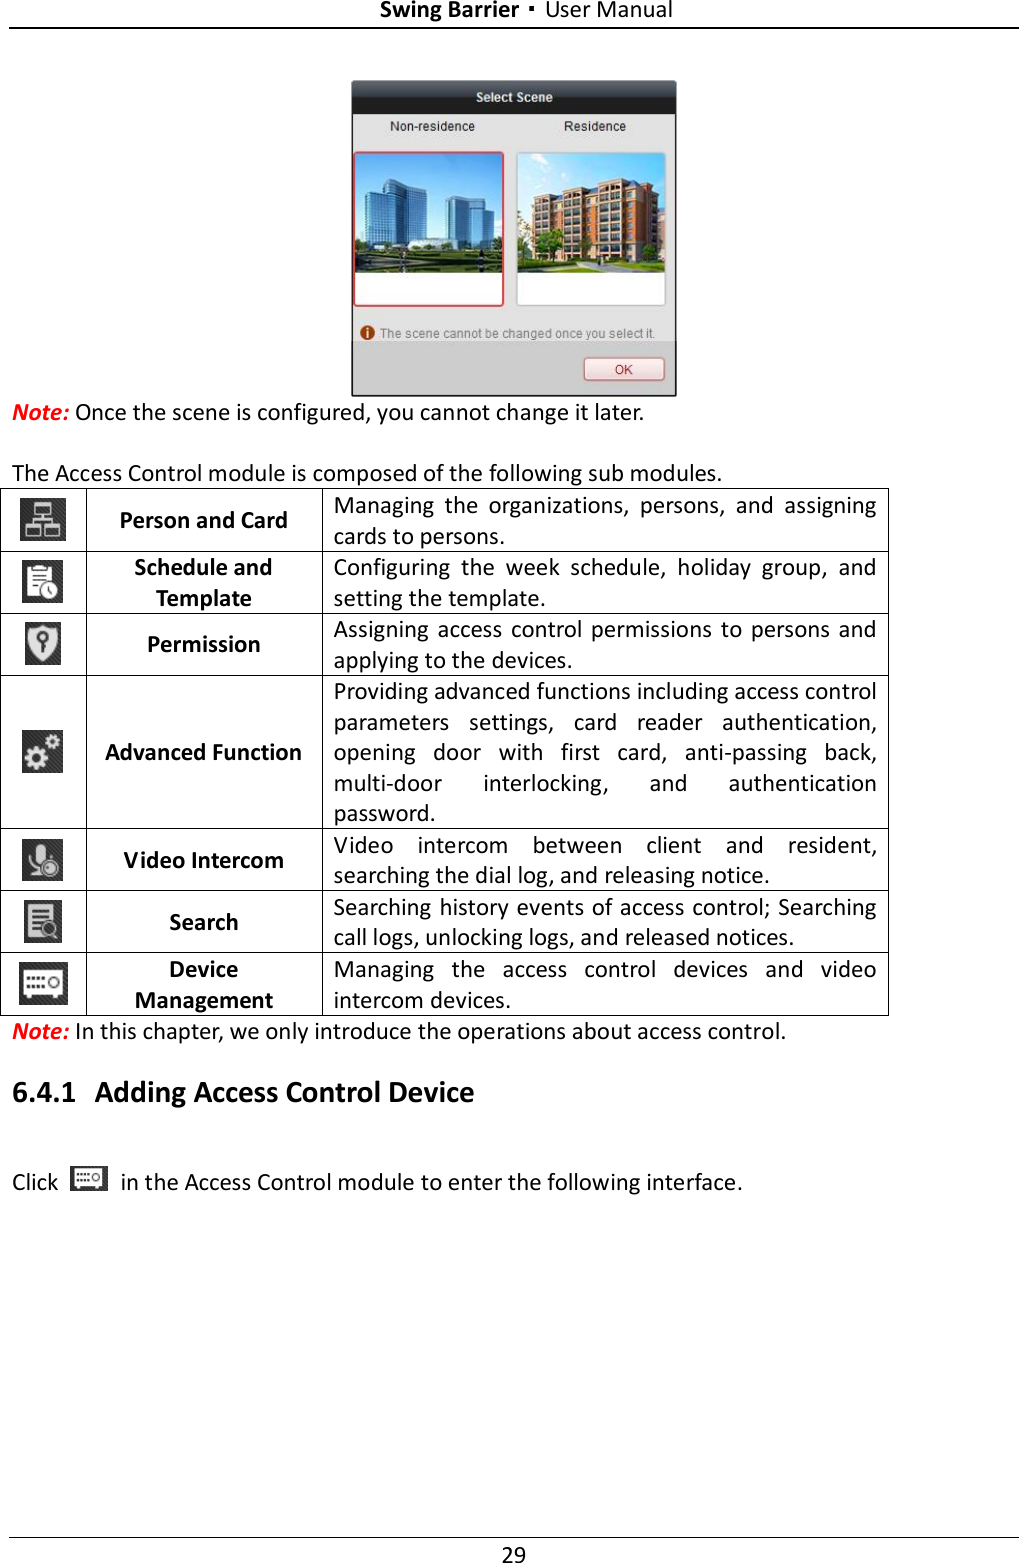 Swing Barrier·User Manual 29  Note: Once the scene is configured, you cannot change it later.  The Access Control module is composed of the following sub modules.  Person and Card Managing  the  organizations,  persons,  and  assigning cards to persons.  Schedule and Template Configuring  the  week  schedule,  holiday  group,  and setting the template.  Permission Assigning  access  control permissions  to  persons  and applying to the devices.  Advanced Function Providing advanced functions including access control parameters  settings,  card  reader  authentication, opening  door  with  first  card,  anti-passing  back, multi-door  interlocking,  and  authentication password.  Video Intercom Video  intercom  between  client  and  resident, searching the dial log, and releasing notice.  Search Searching history events of access control; Searching call logs, unlocking logs, and released notices.  Device Management Managing  the  access  control  devices  and  video intercom devices. Note: In this chapter, we only introduce the operations about access control.   6.4.1 Adding Access Control Device Click    in the Access Control module to enter the following interface. 